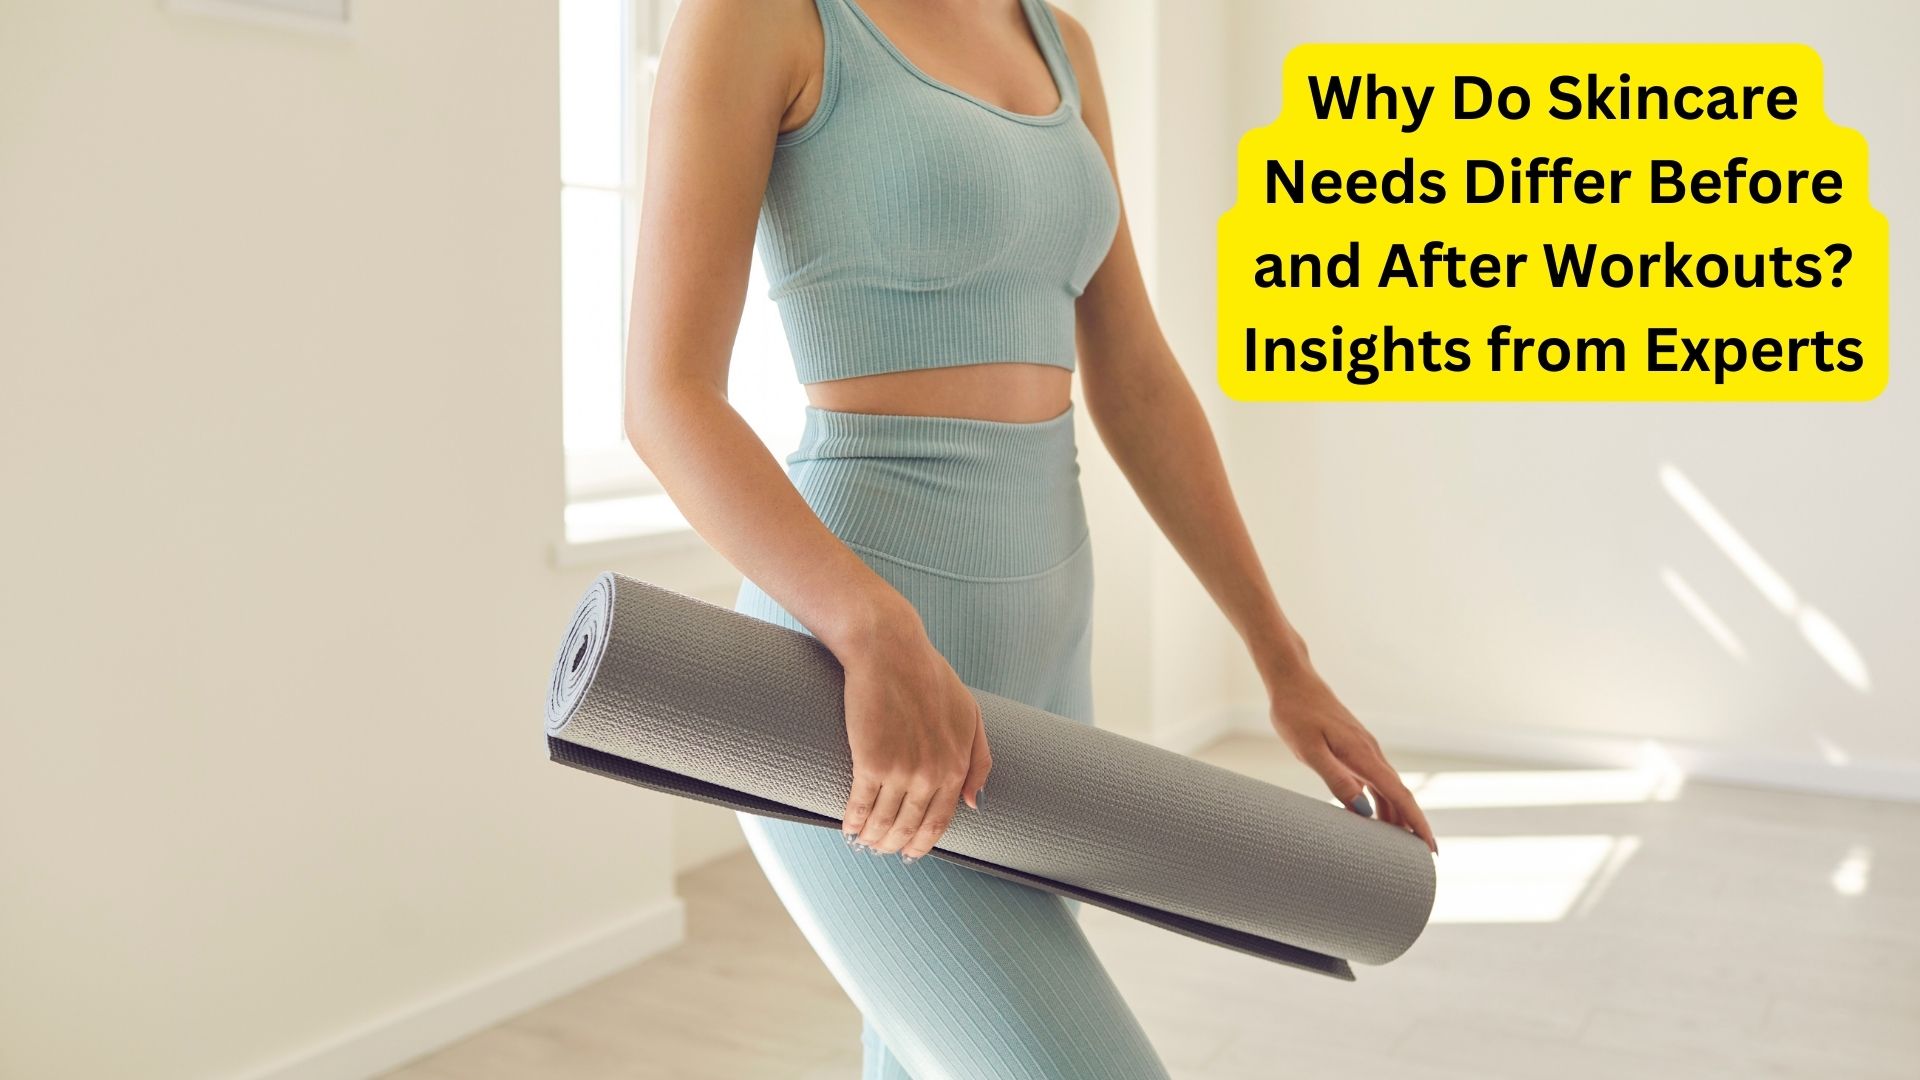 Why Do Skincare Needs Differ Before and After Workouts? Insights from Experts